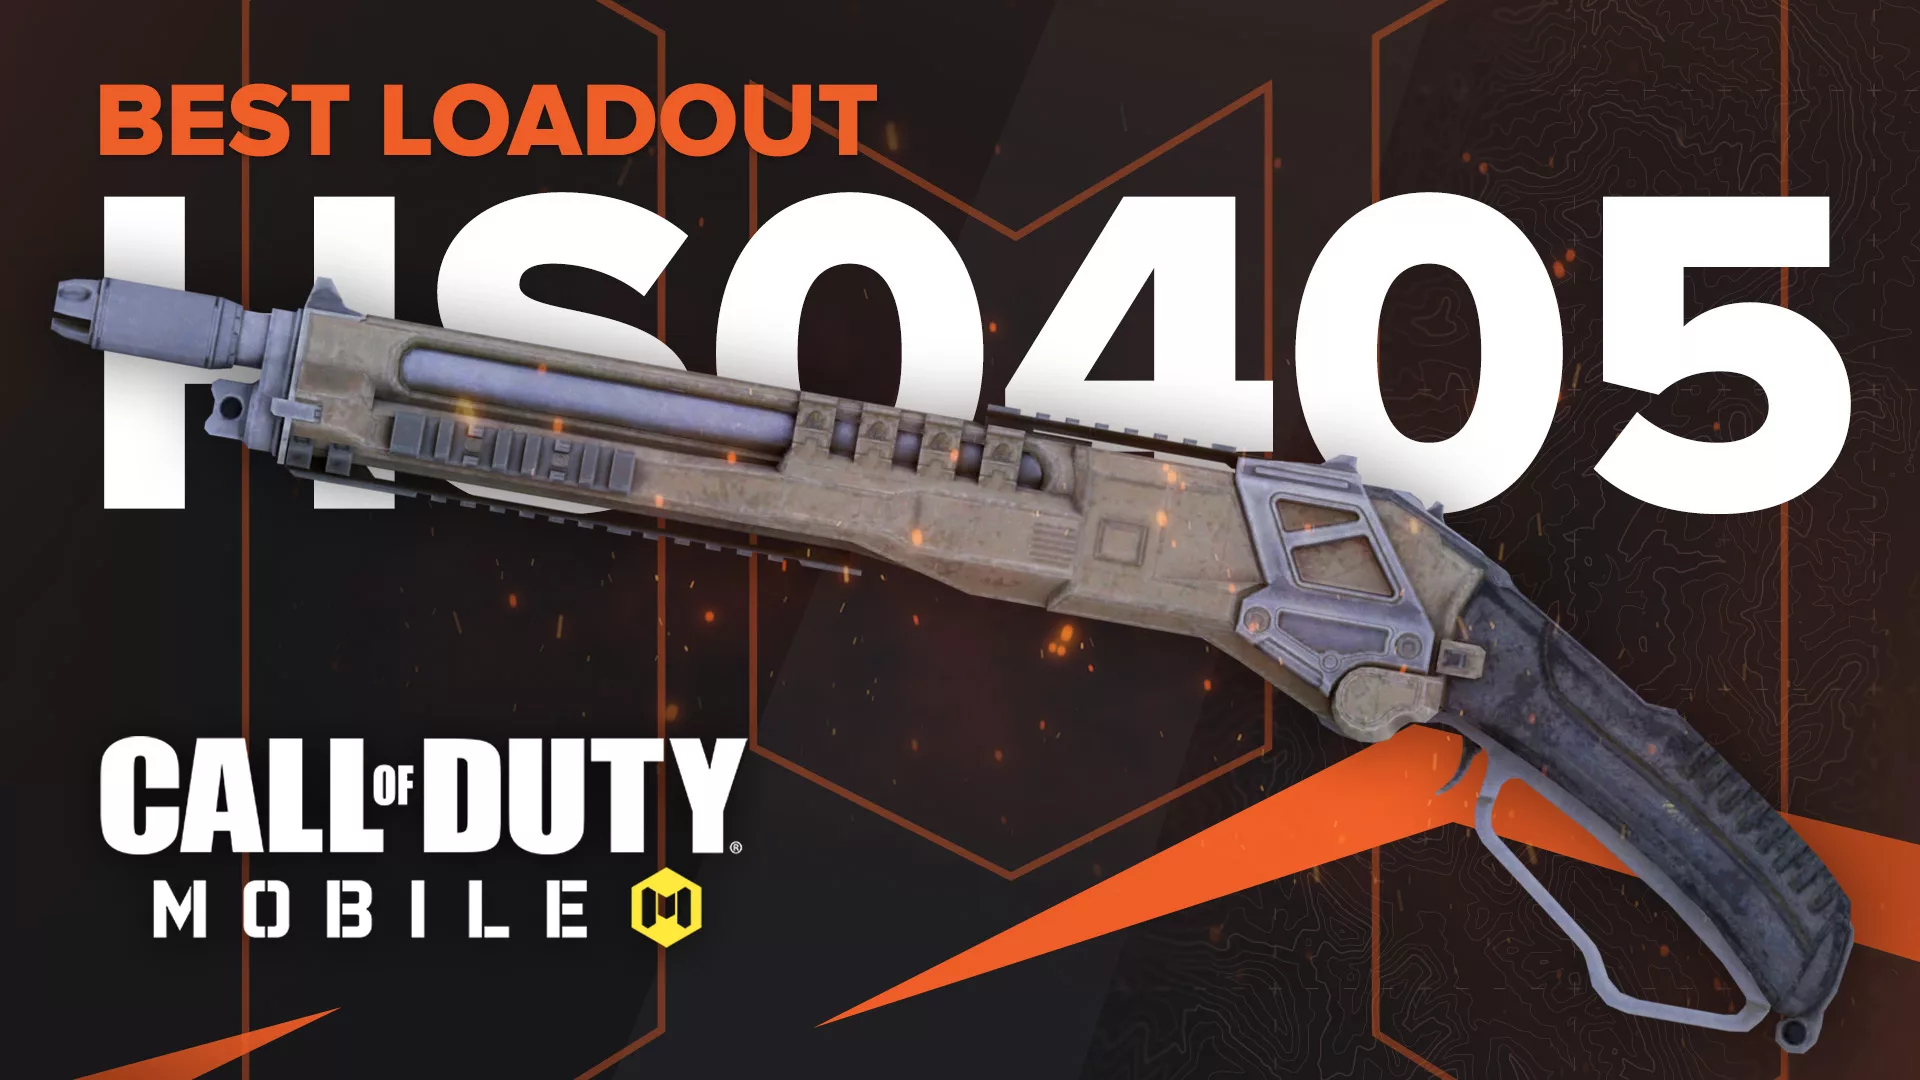 The Best HS0405 Loadout in Call of Duty Mobile